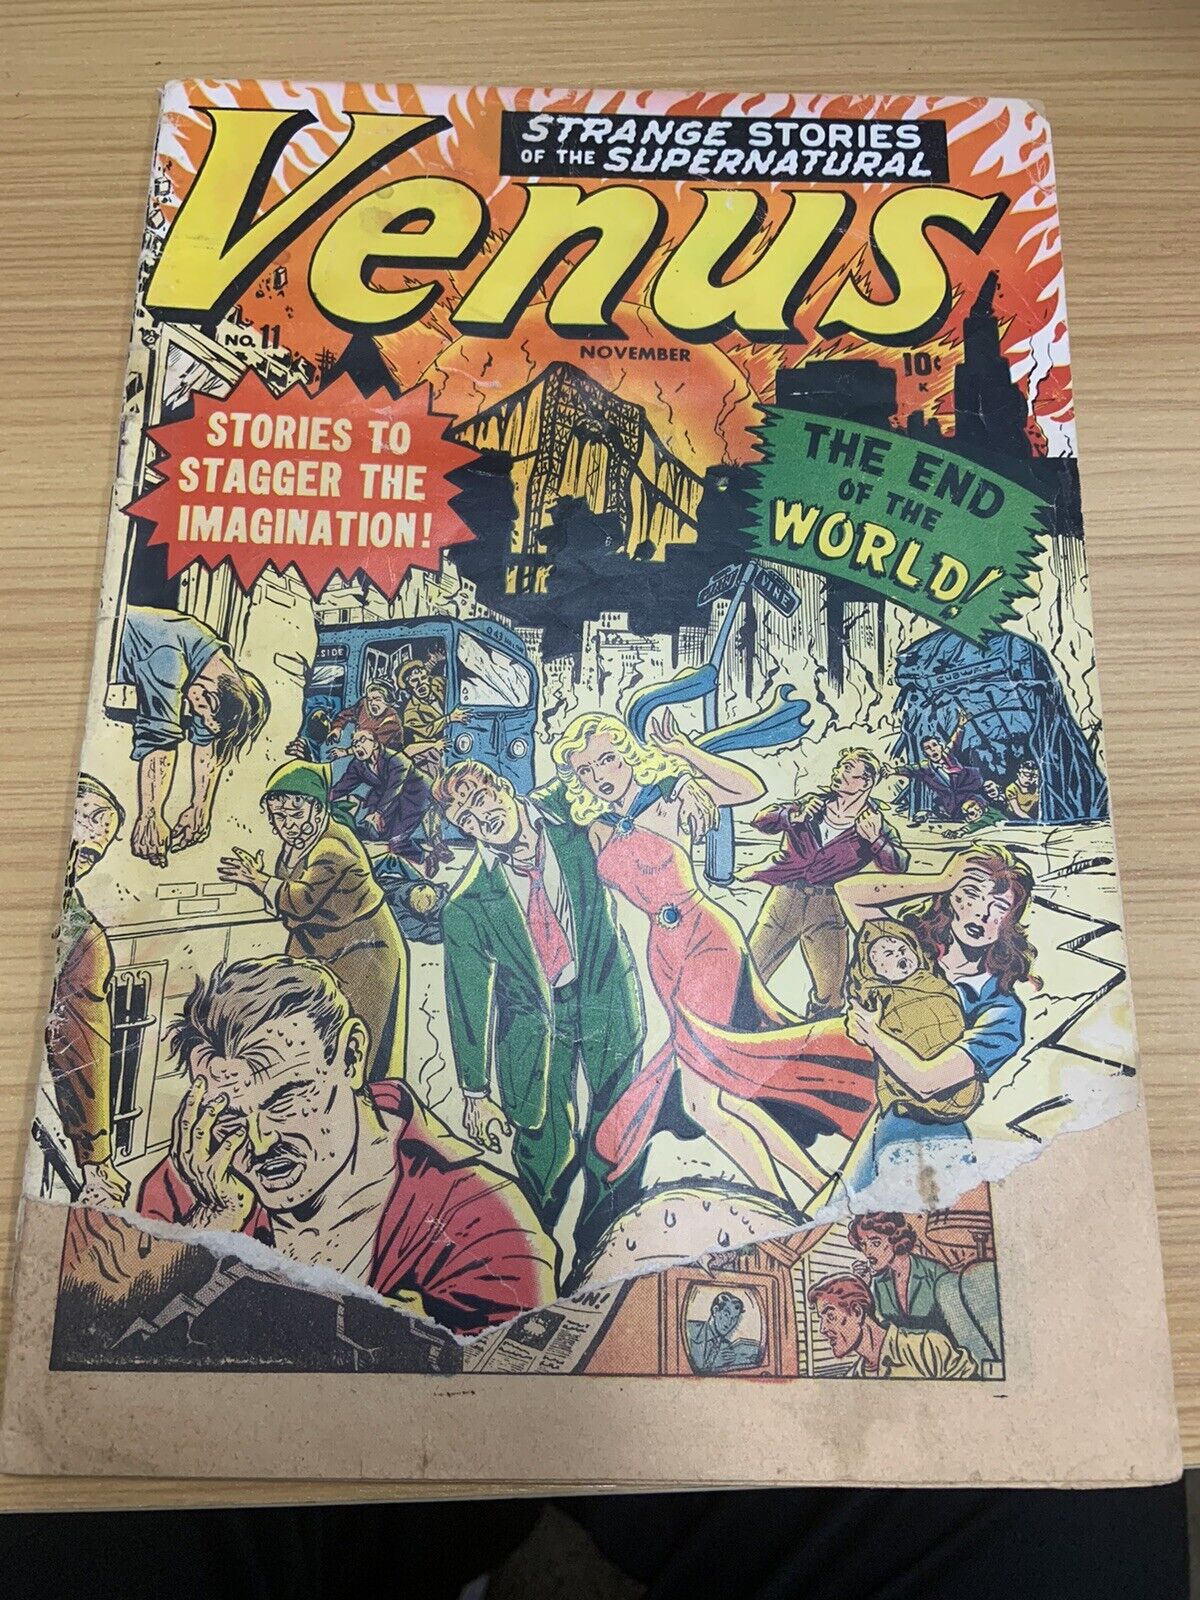 Venus #11 End Of The world Cover And Story Very Hard To Find Original